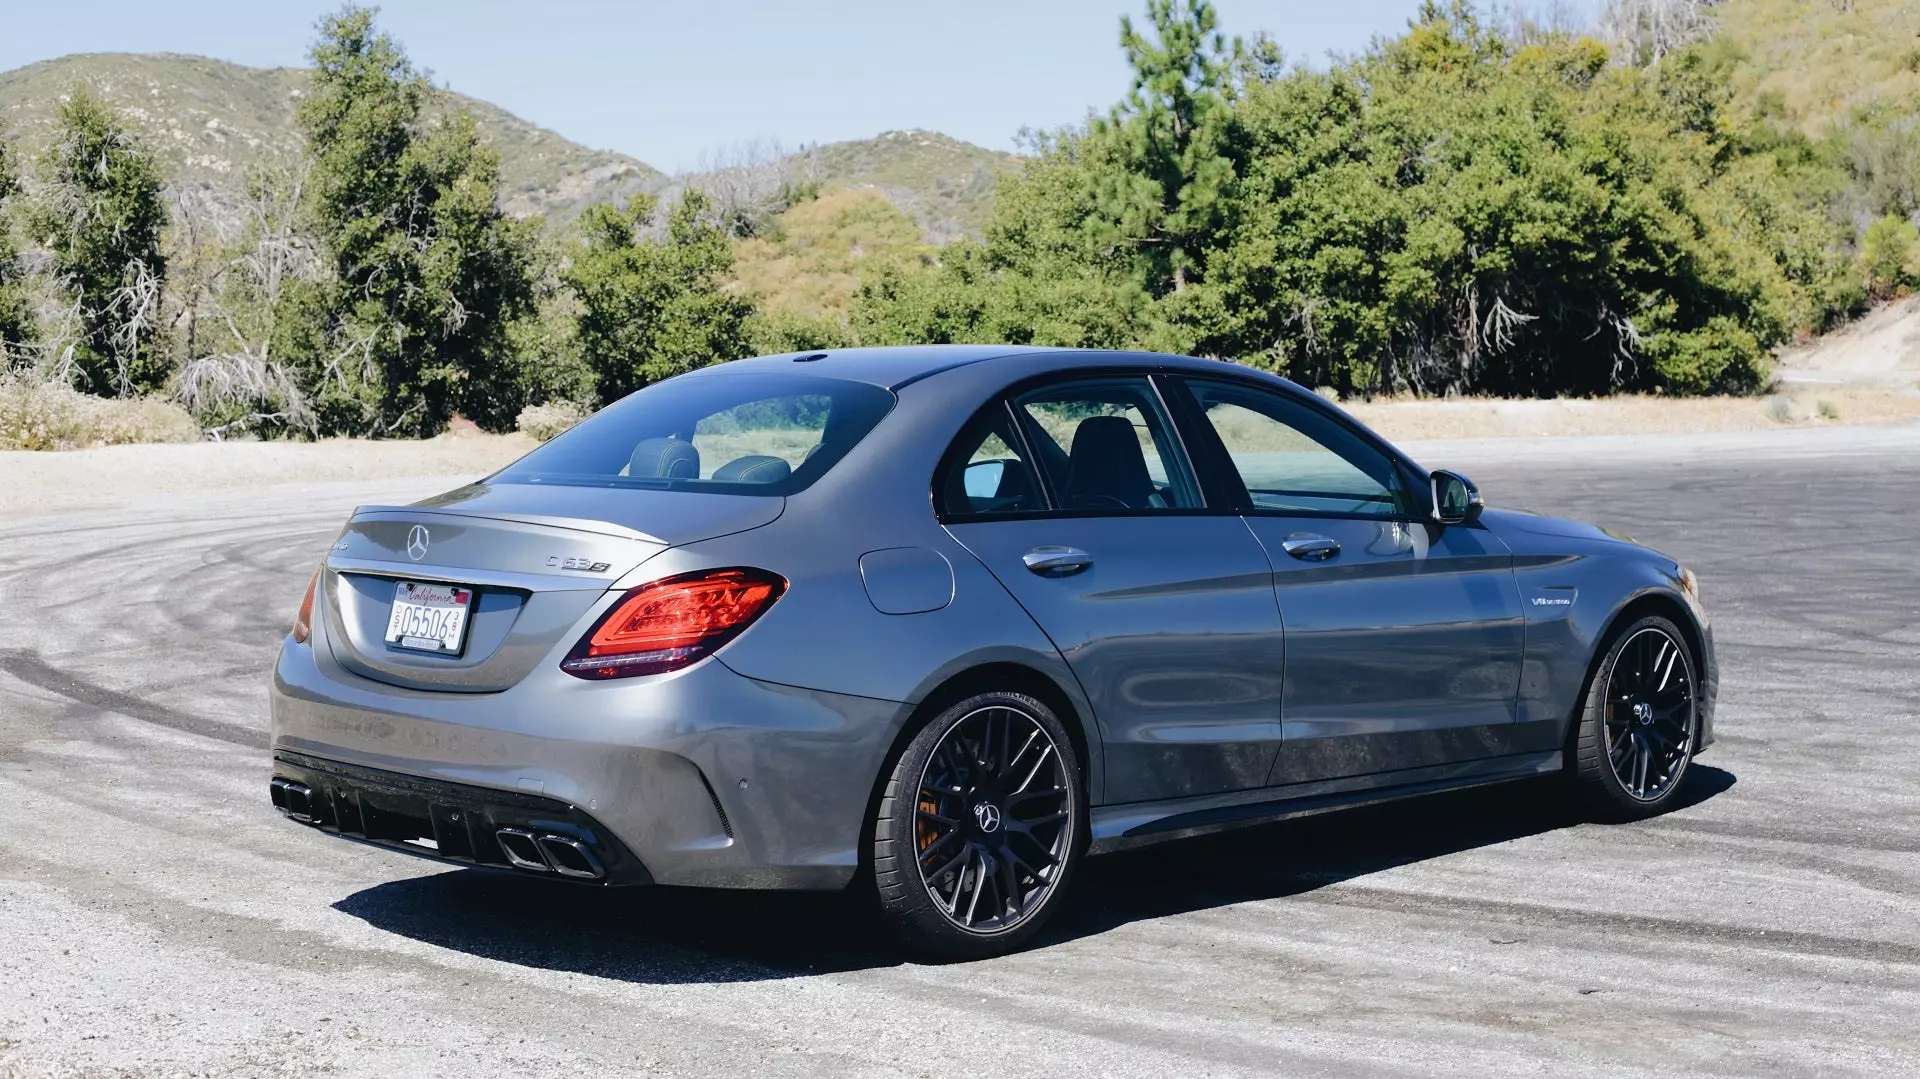 My First Experience With the Mercedes-AMG M177 Engine Was Glorious